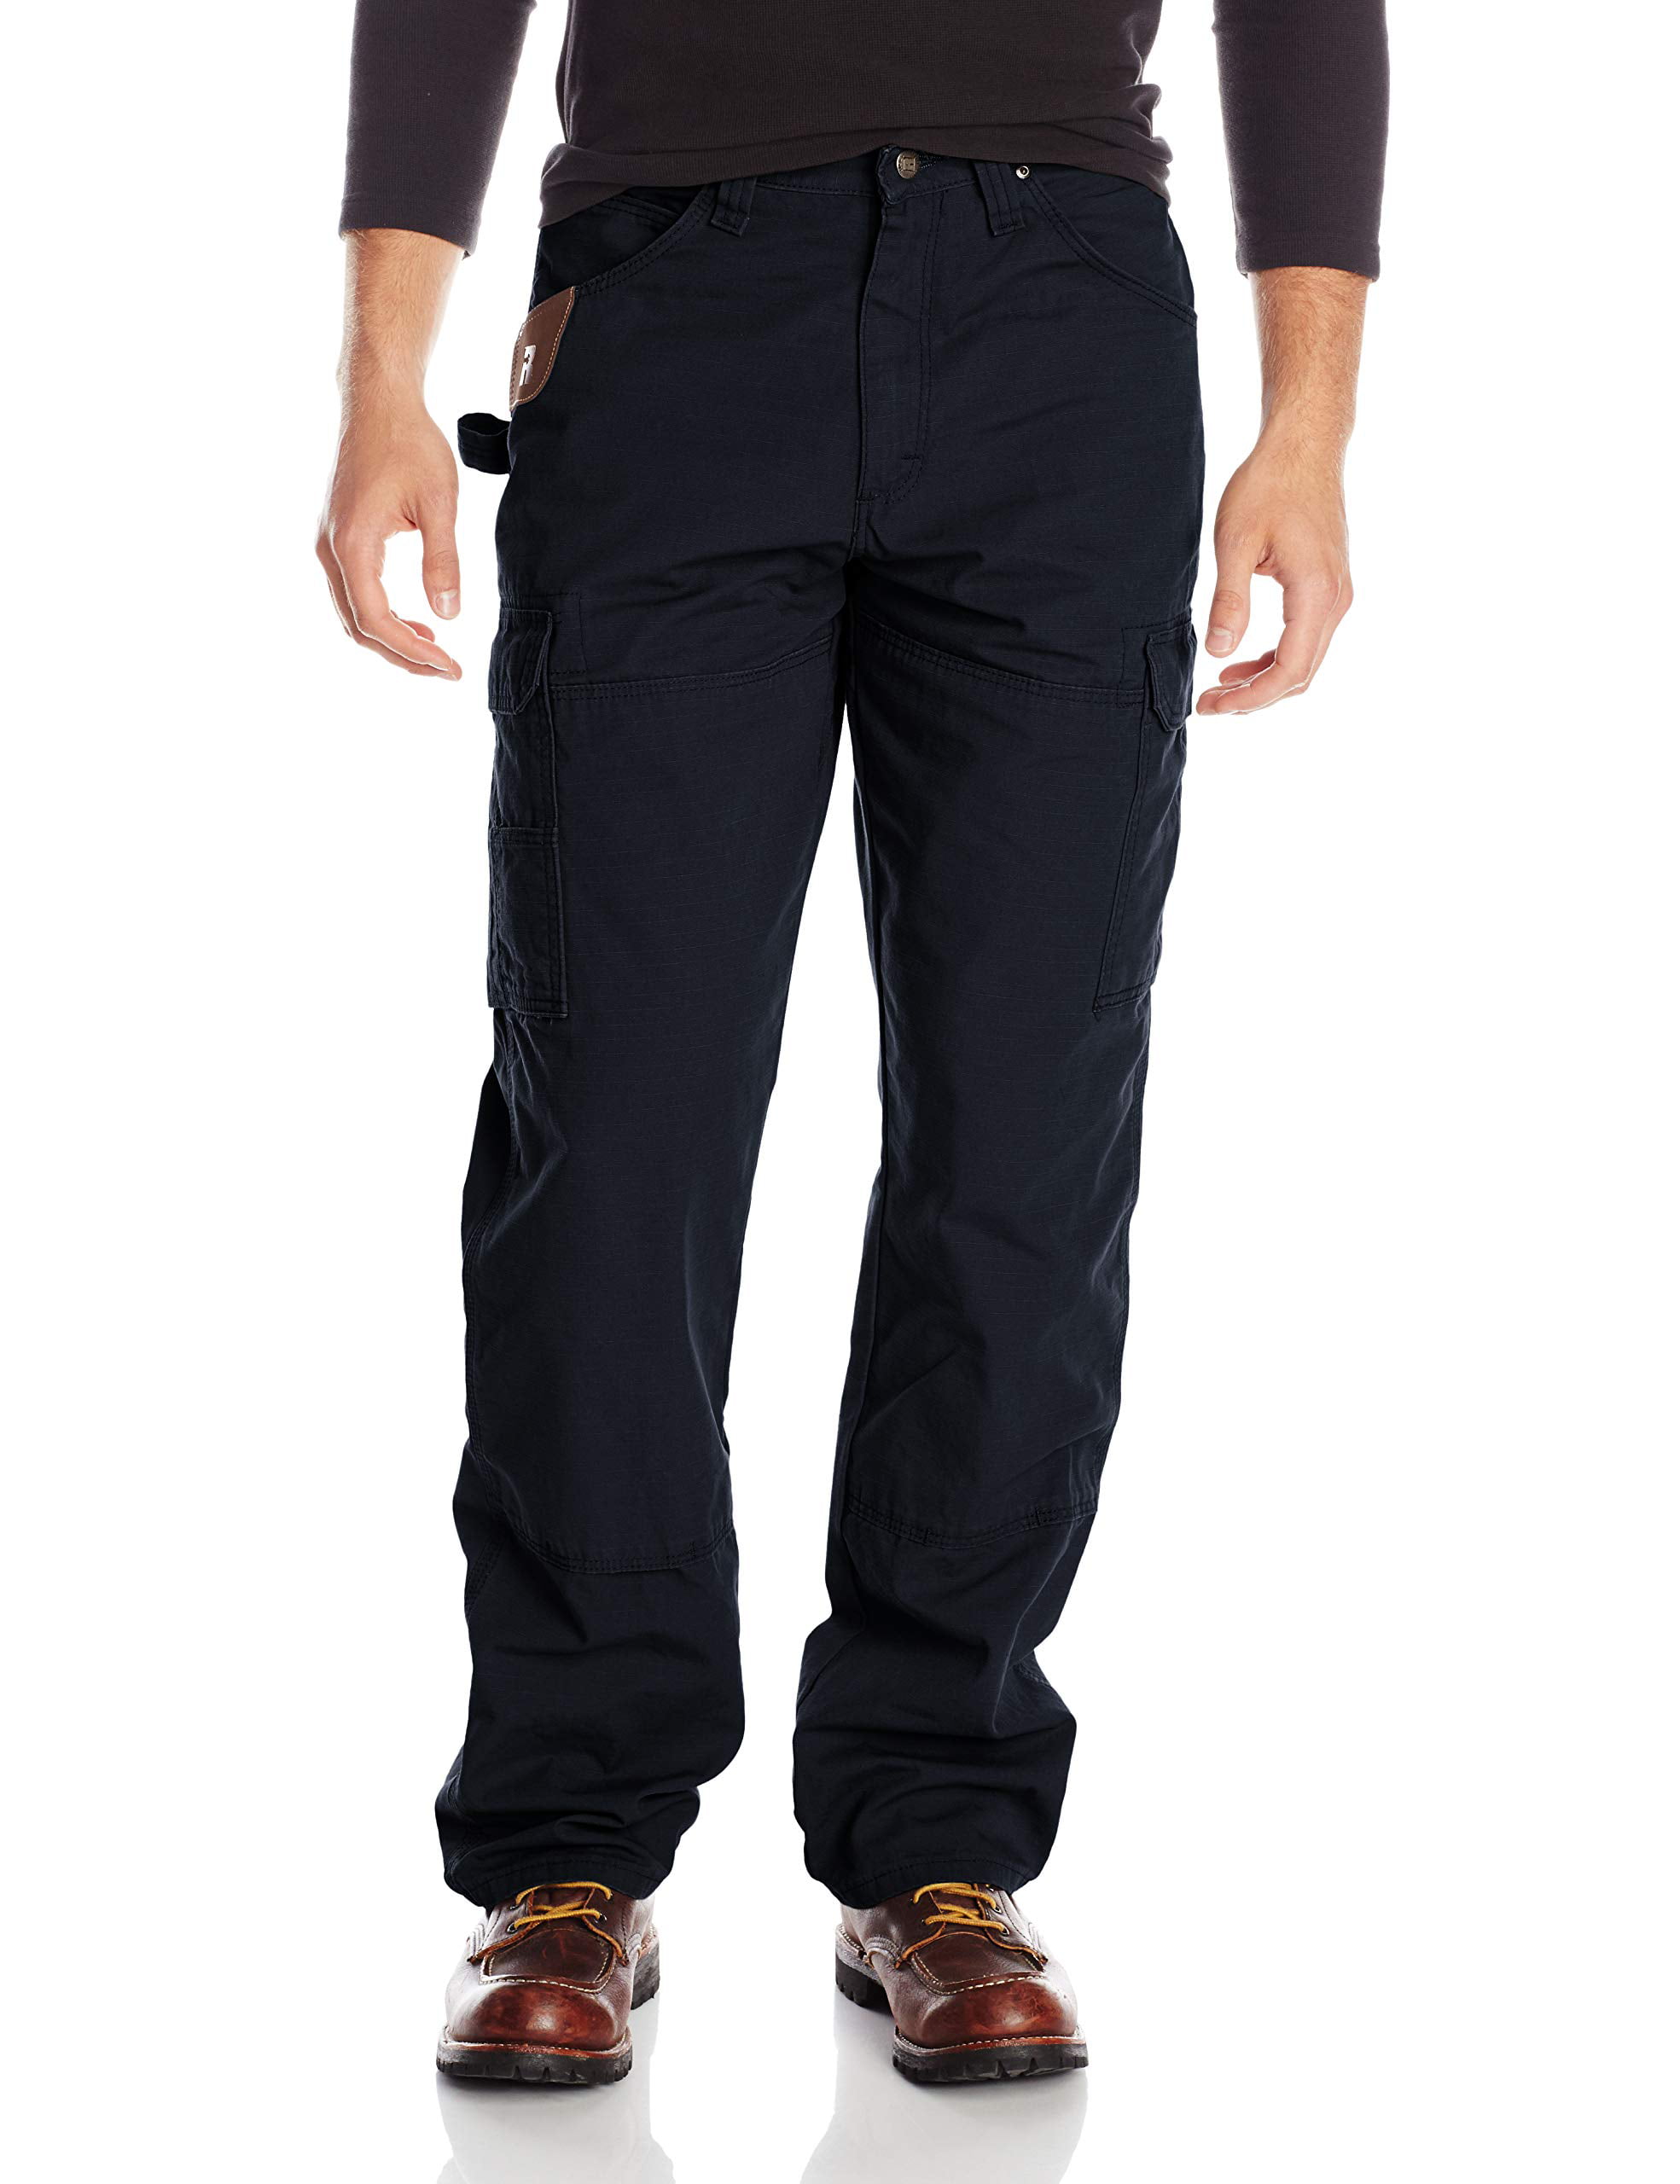 Wrangler - Mens Navy 44x30 Cargo Work Relaxed Fit Cotton Pants 44 ...